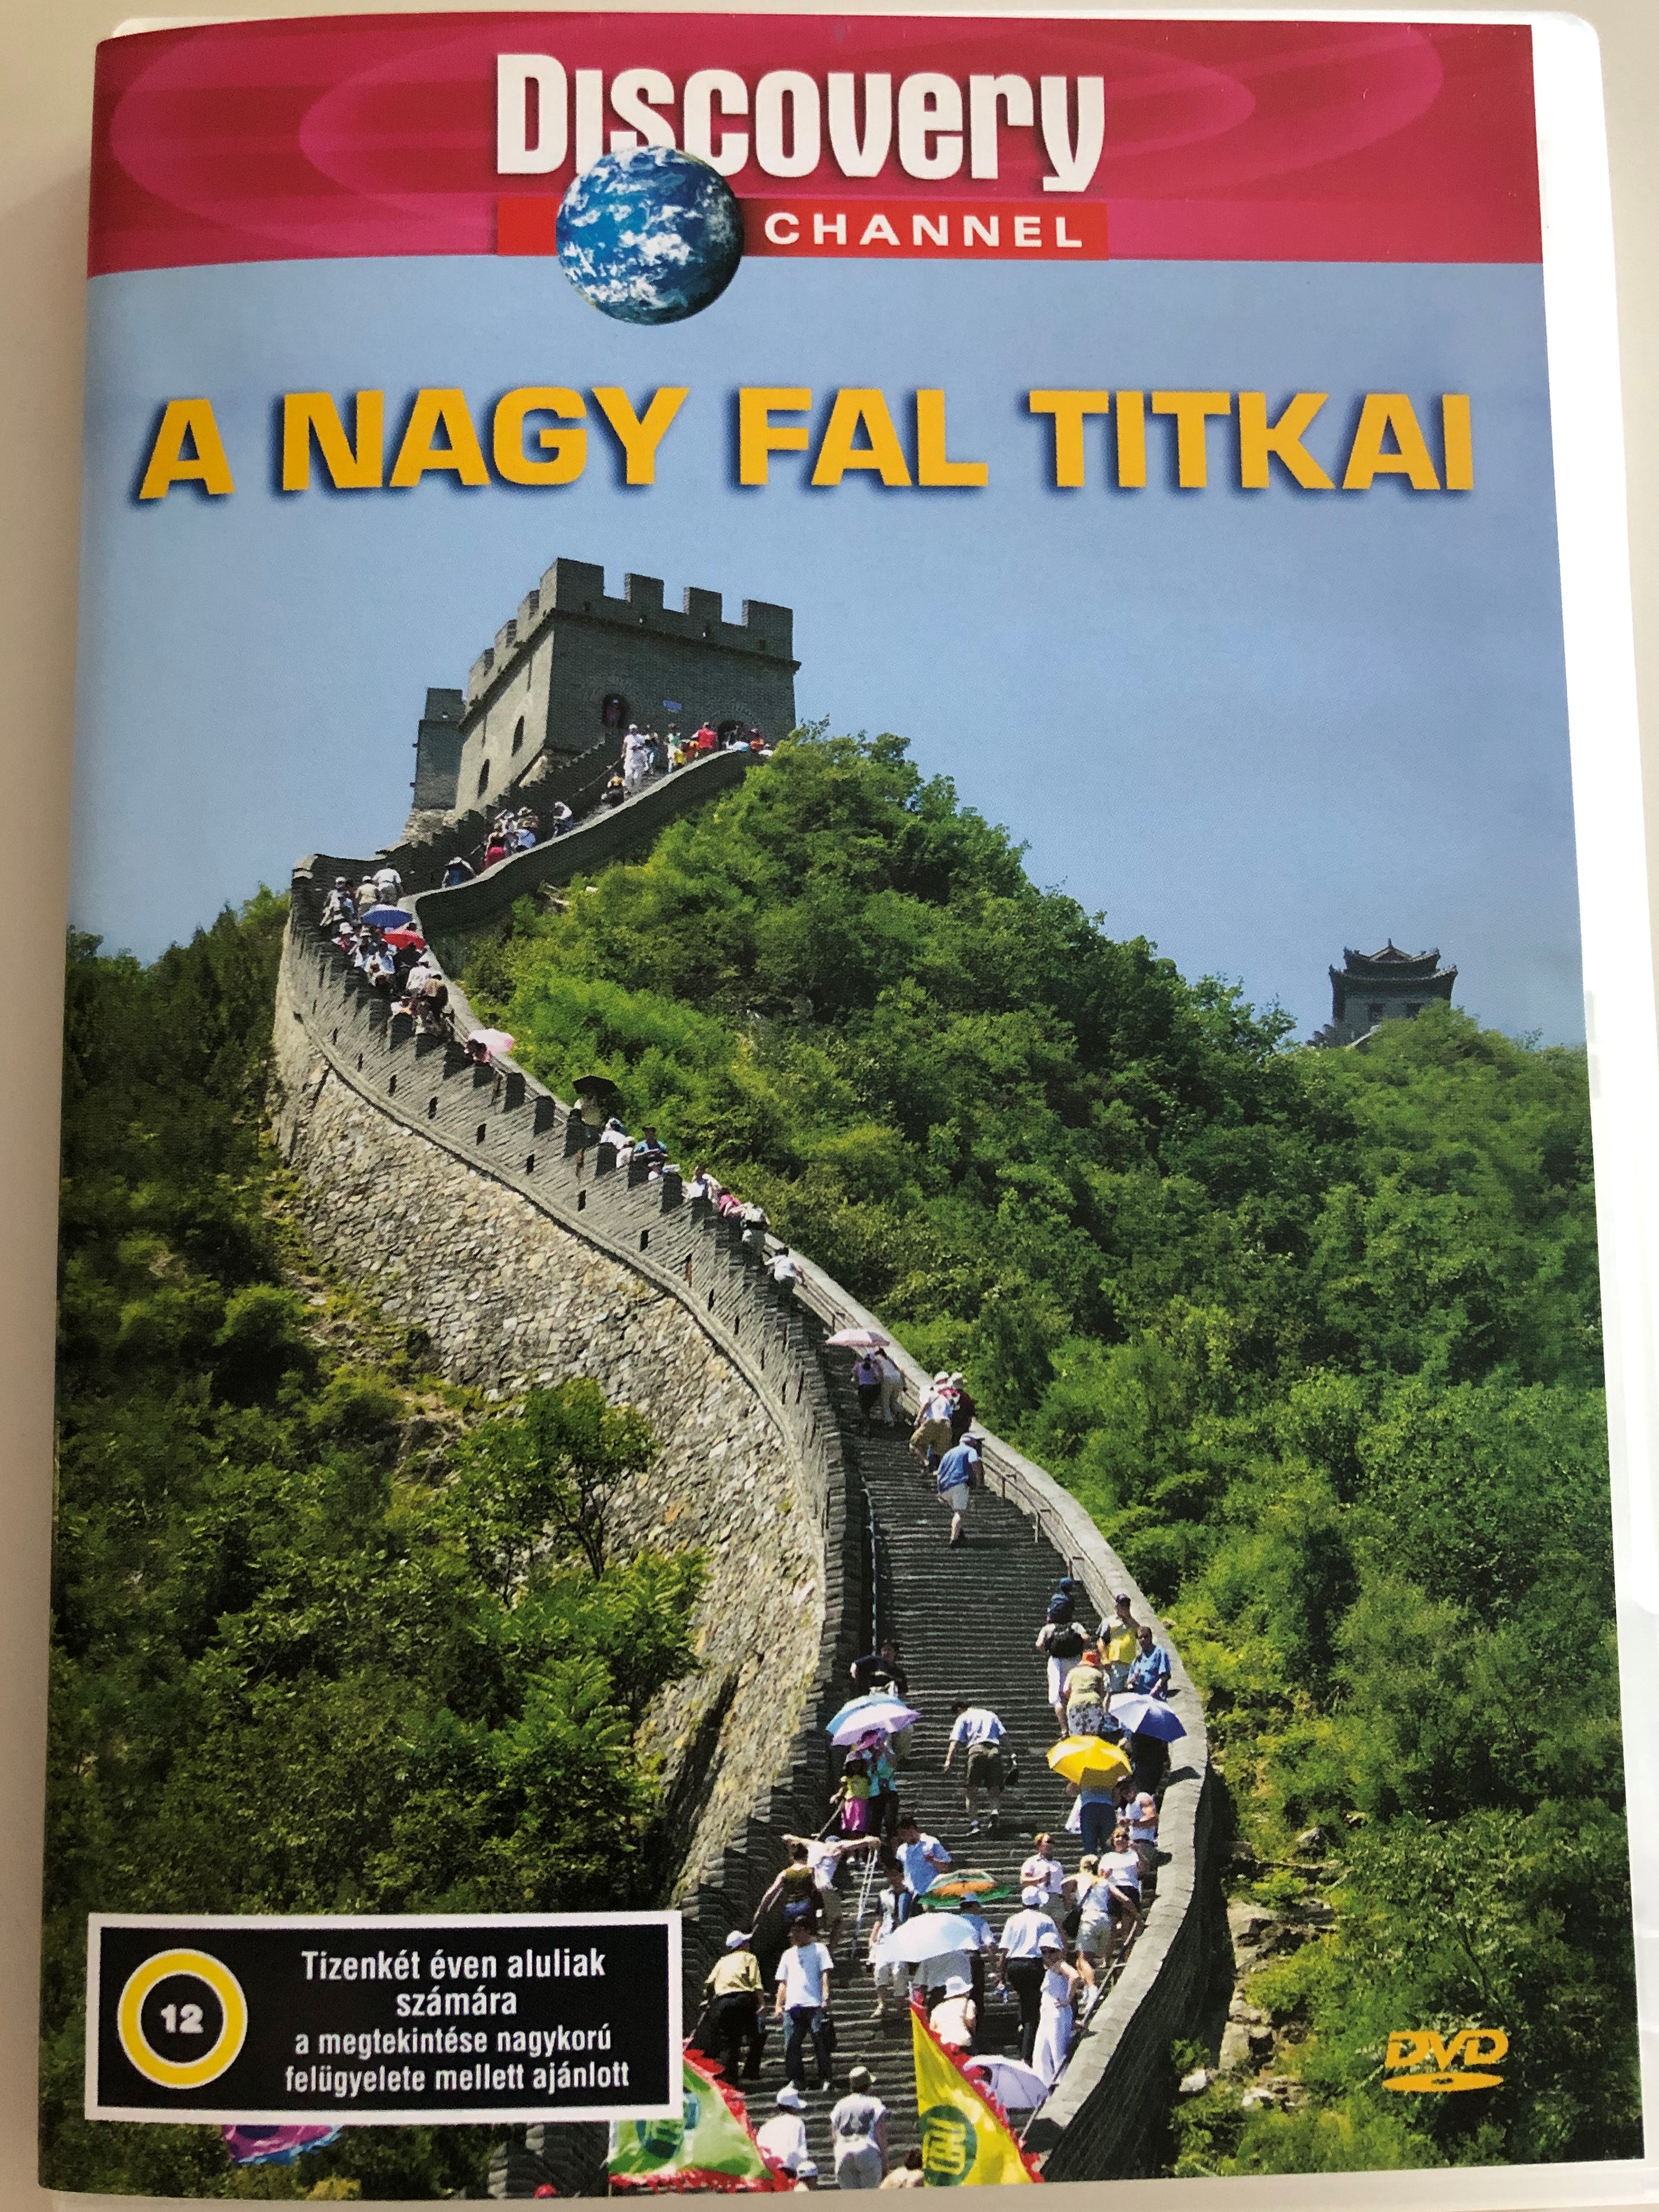 secrets-of-the-great-wall-dvd-1999-a-nagy-fal-titkai-discovery-documentary-directed-by-peter-spry-leverton-1-.jpg